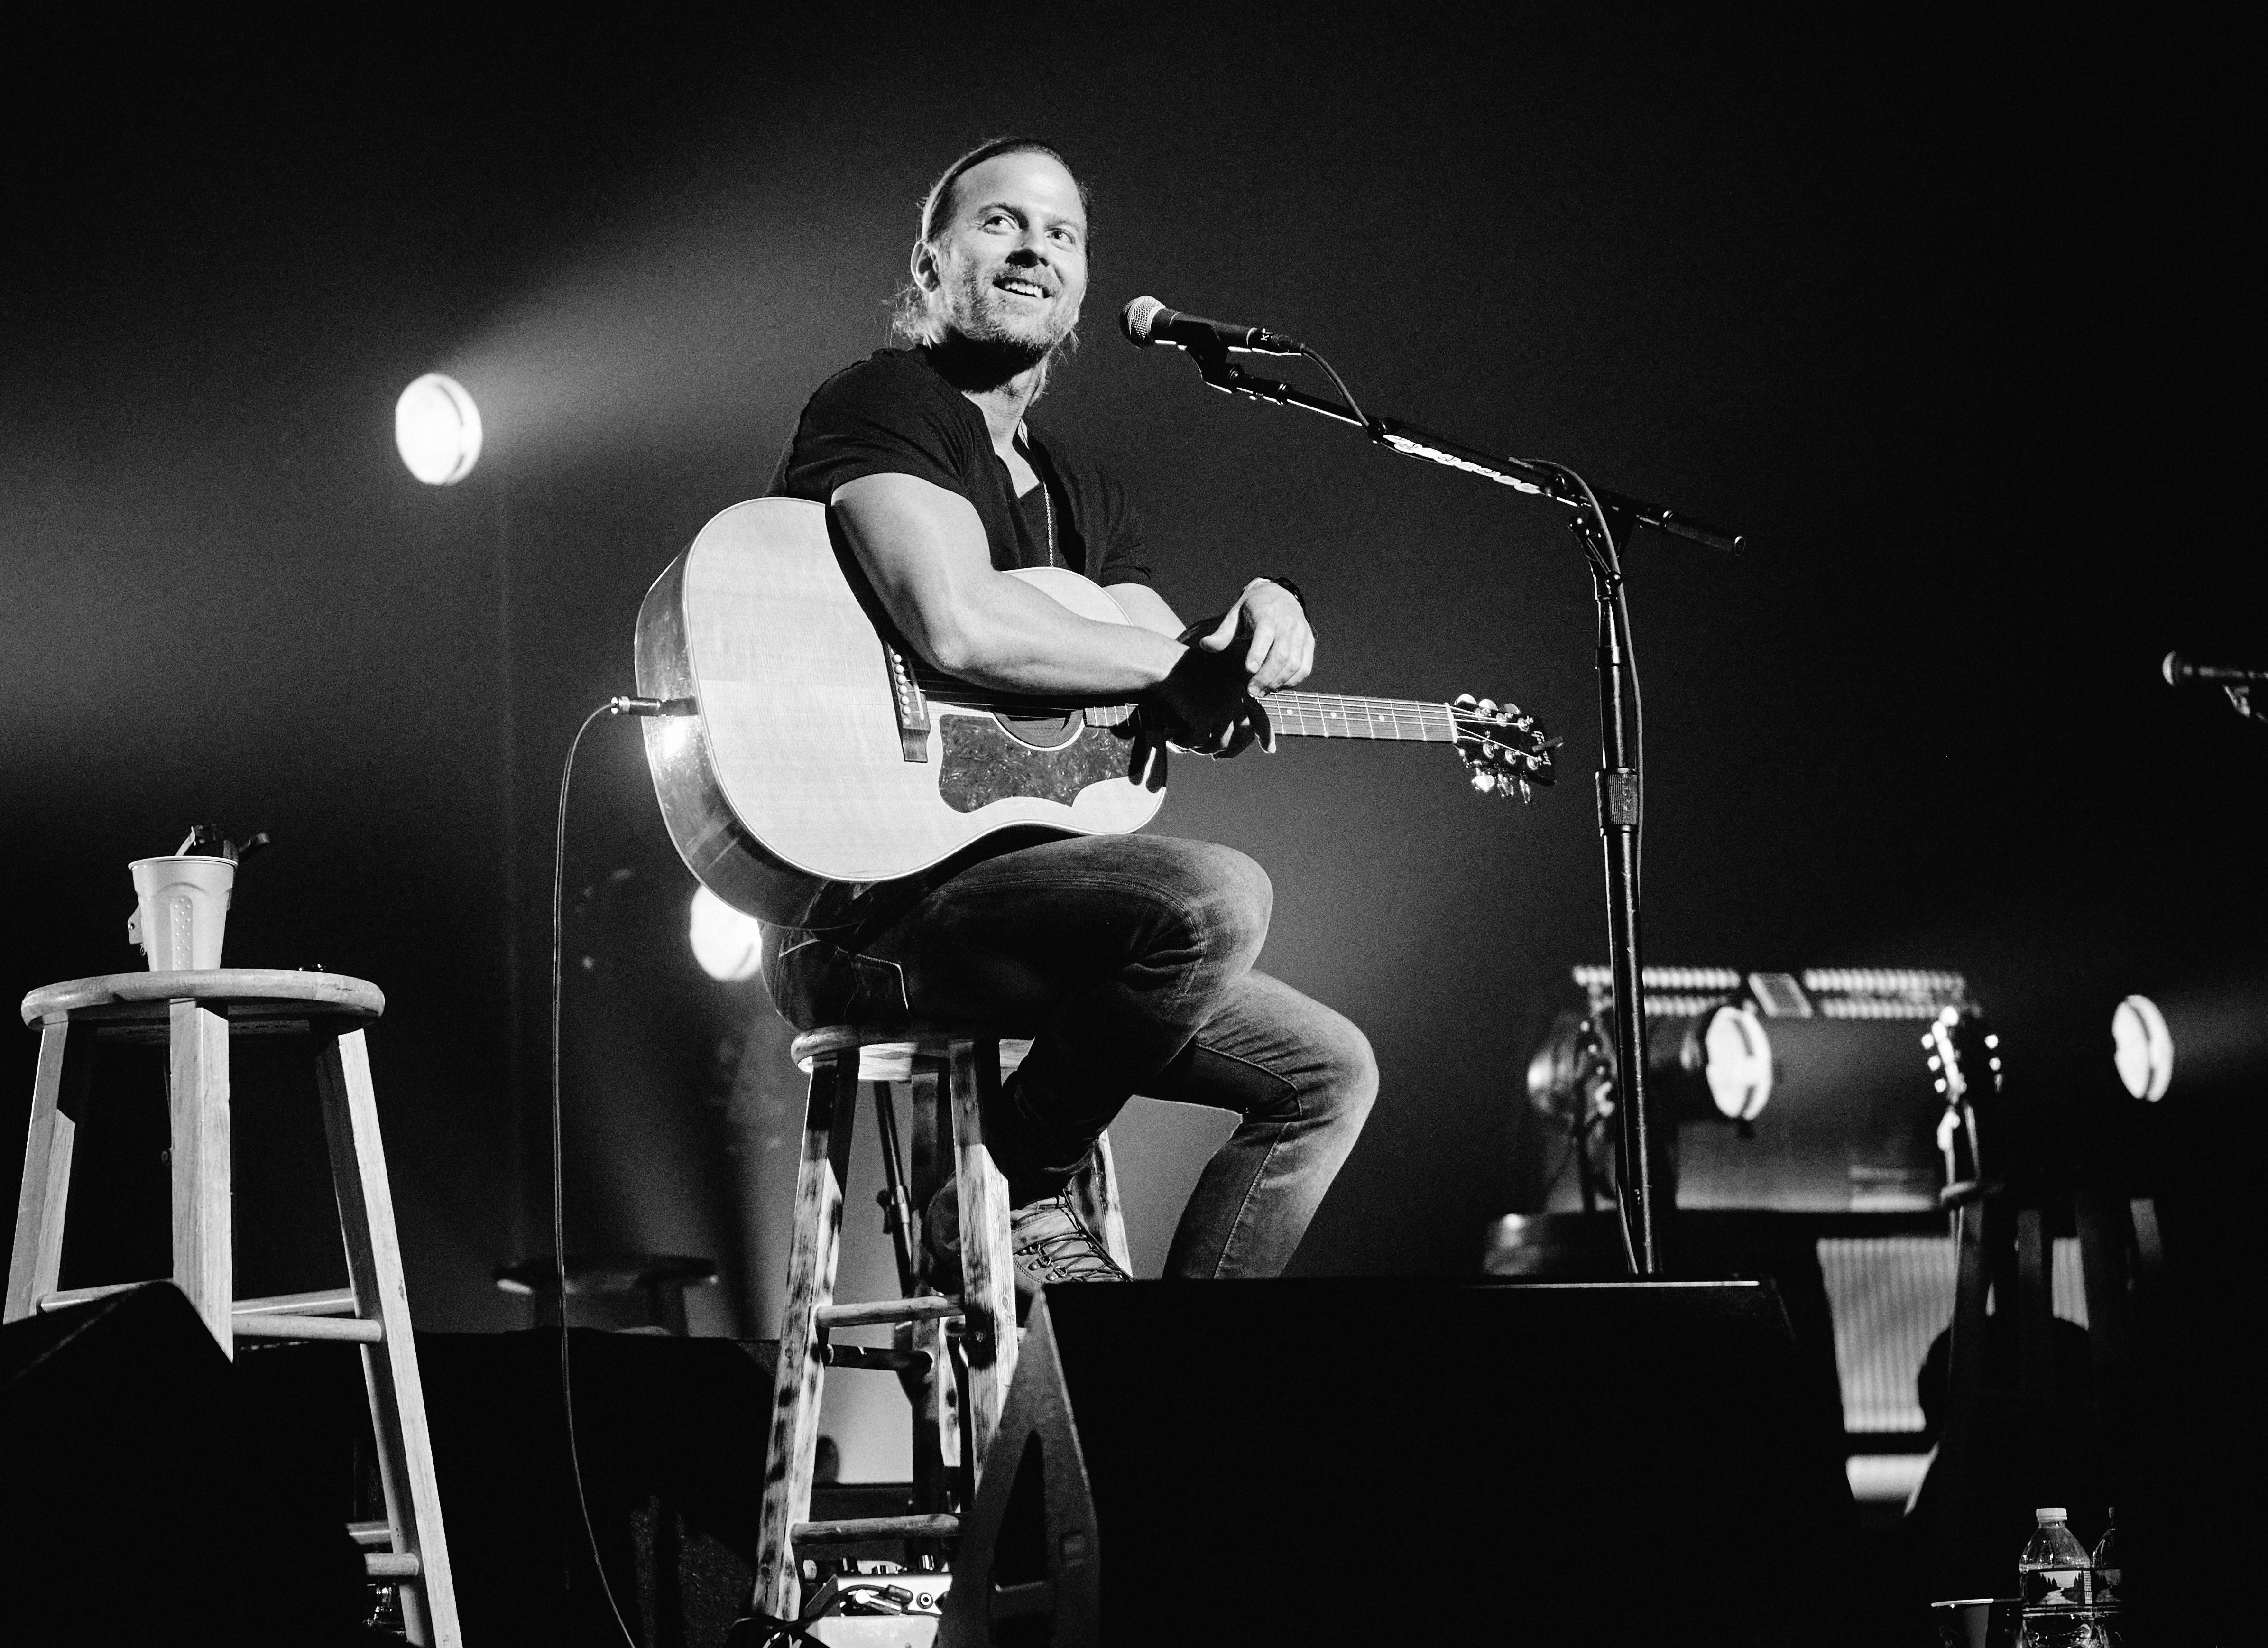 NASHVILLE, TENNESSEE - FEBRUARY 12: (EDITORS NOTE: Image has been converted to black and white.) Singer & songwriter Kip Moore performs at the Ryman Auditorium on February 12, 2021 in Nashville, Tennessee. (Photo by Jason Kempin/Getty Images)